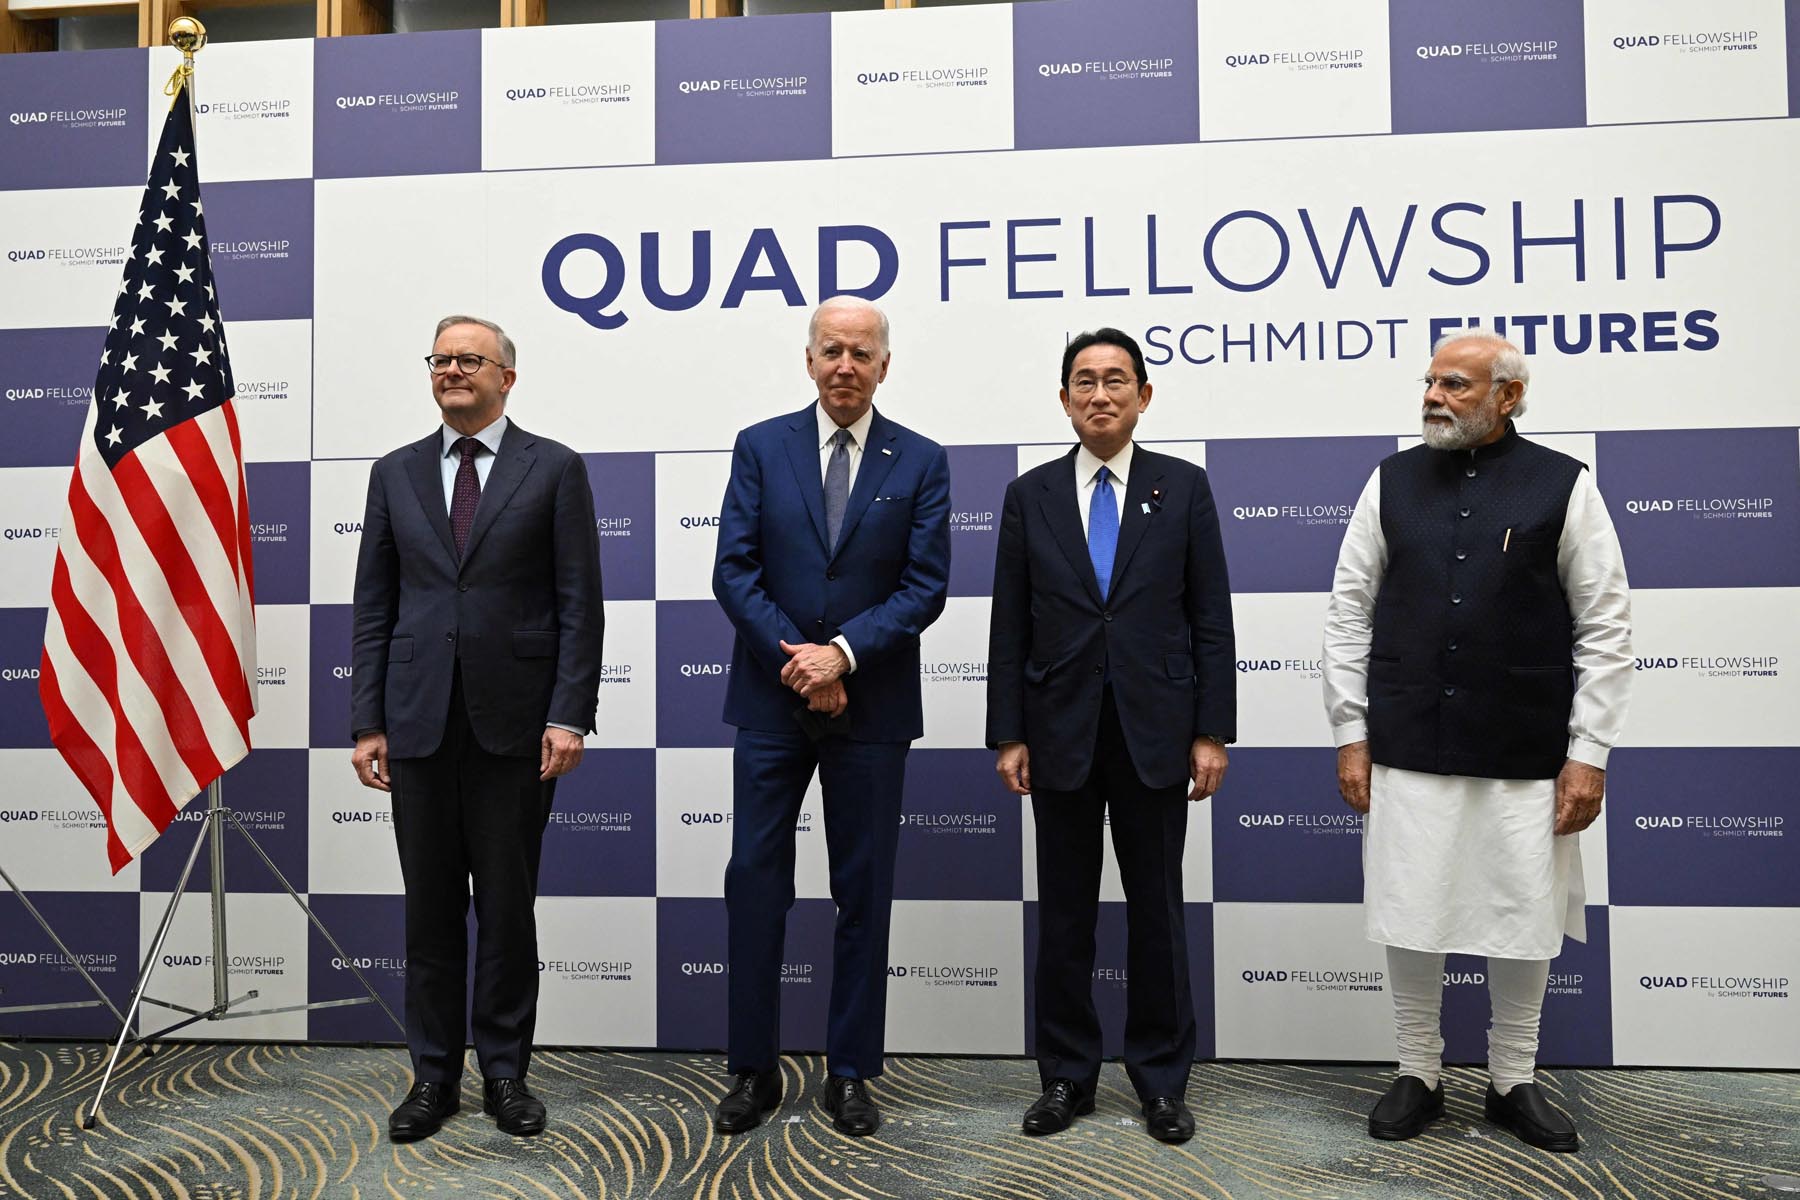 Quad meeting takes place in Tokyo